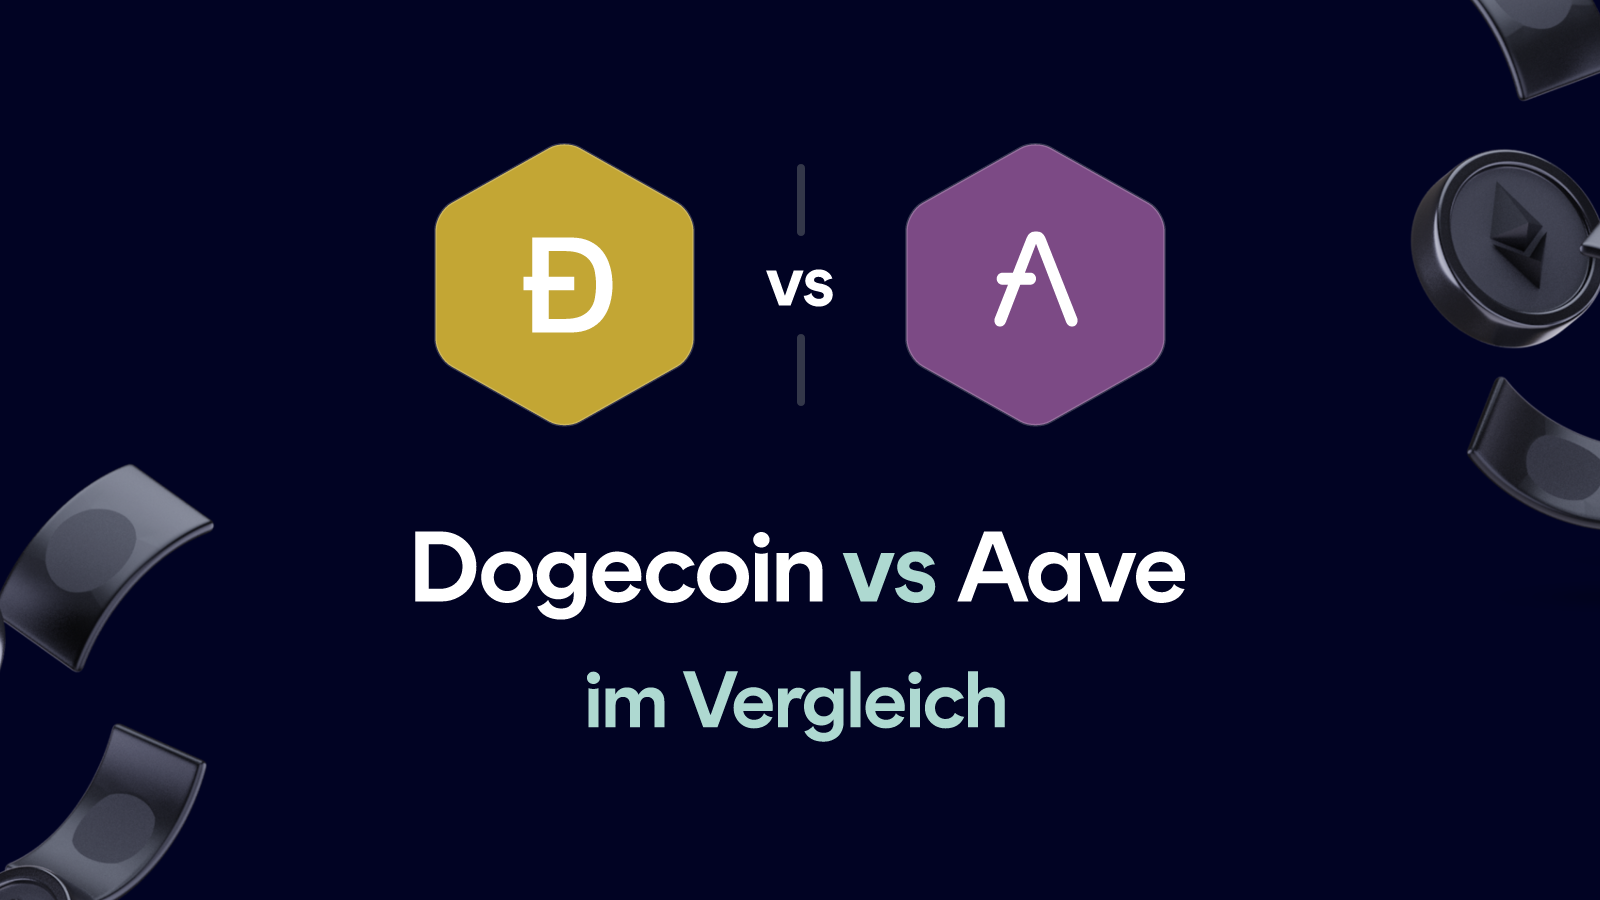 Dogecoin vs Aave